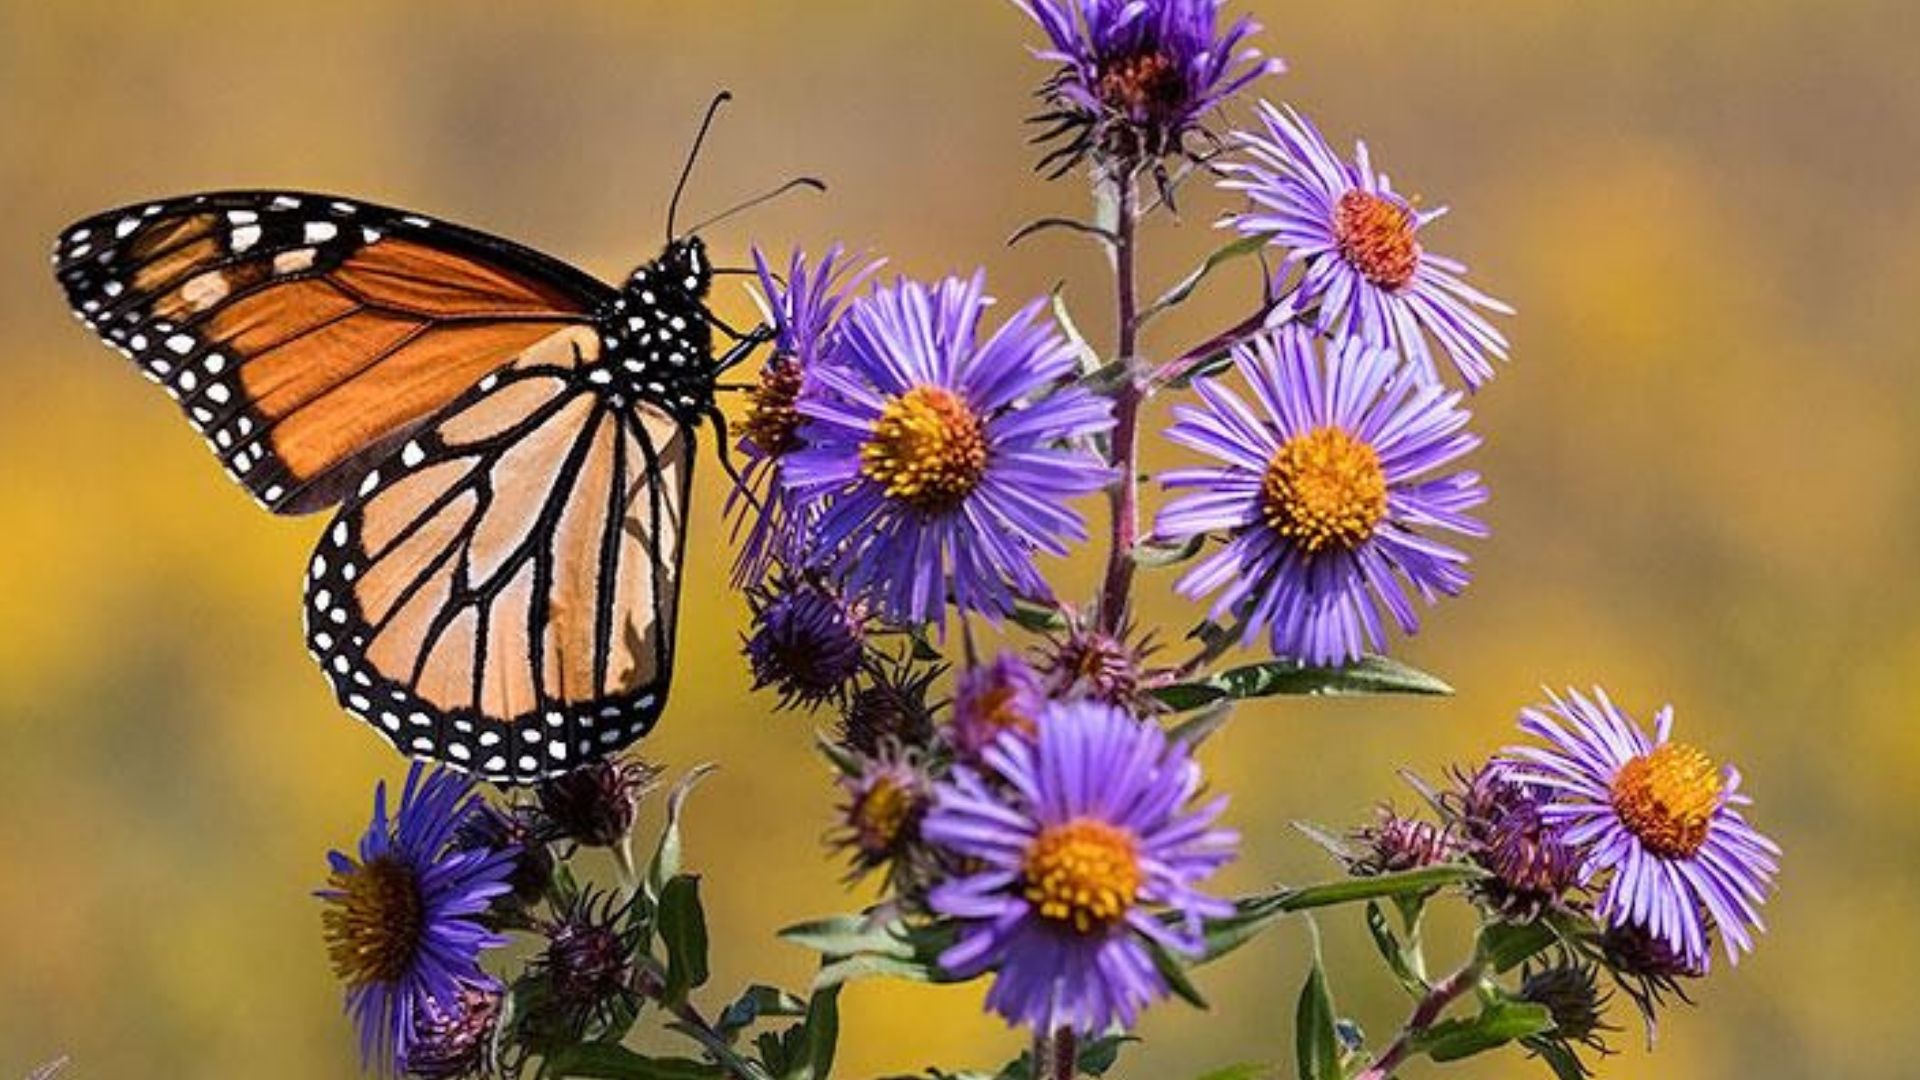 Monarch butterfly with purple new england aster flowers.